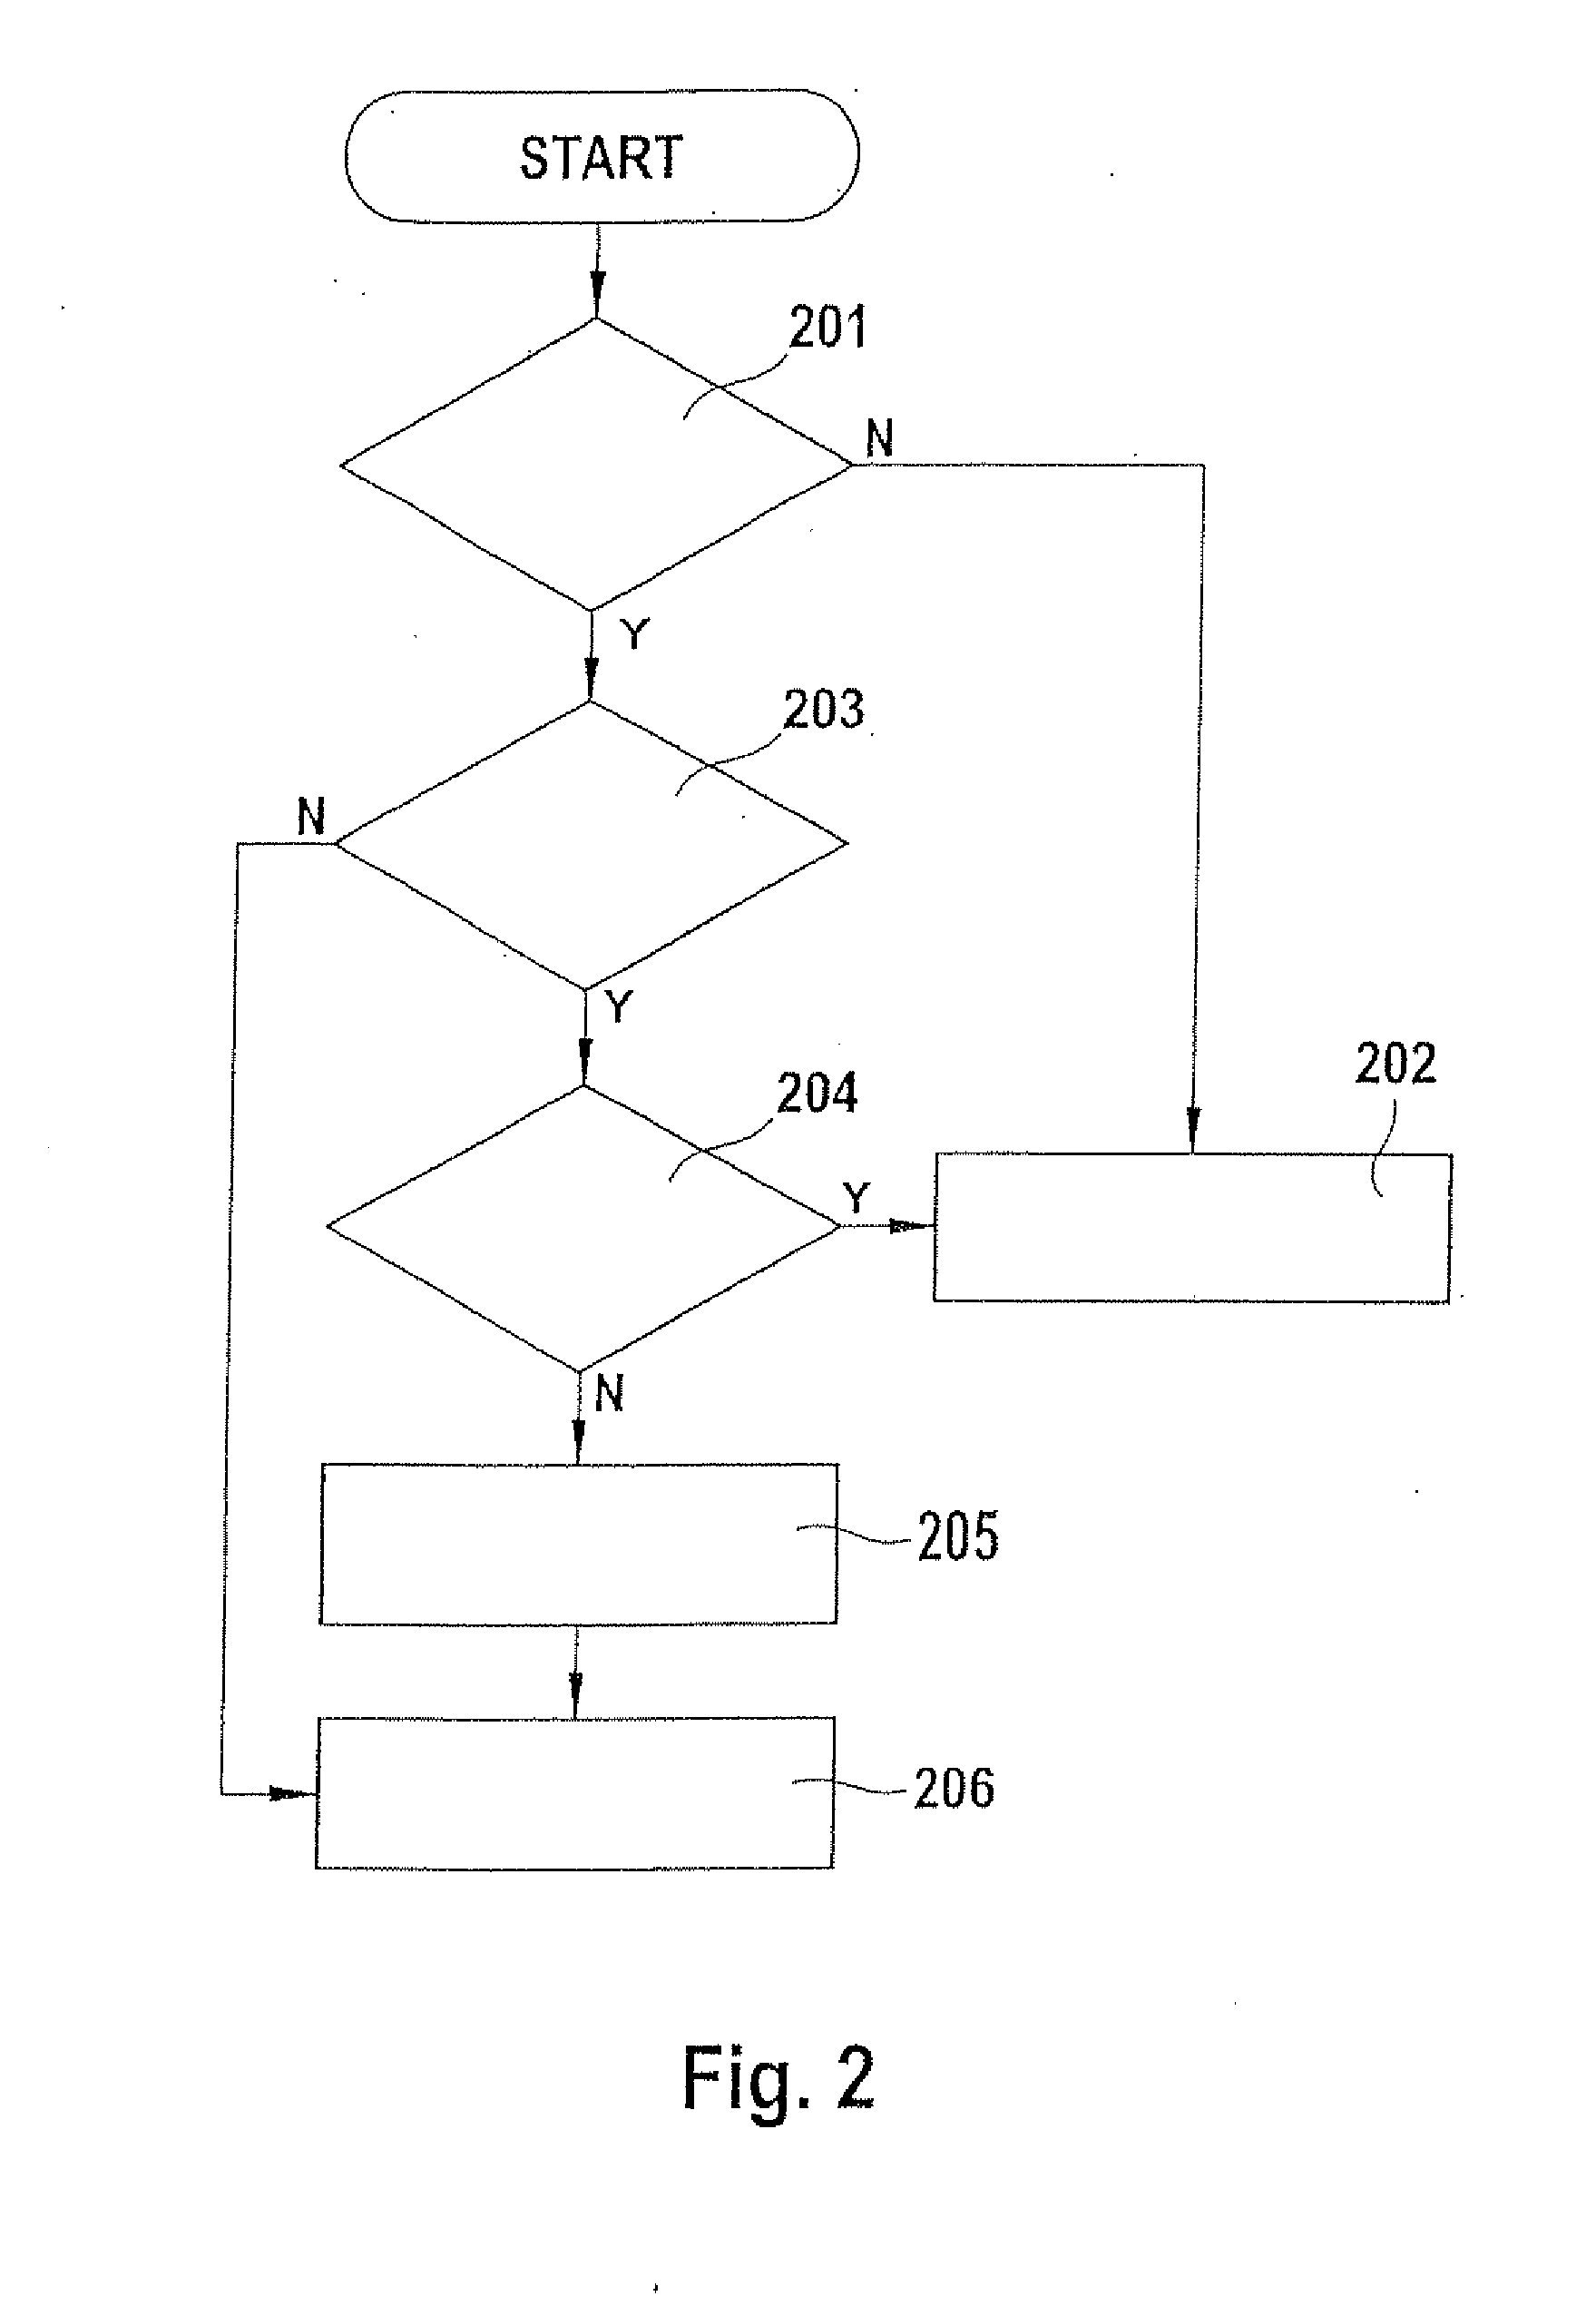 Method for controlling a generation of an alternating current in a vehicle